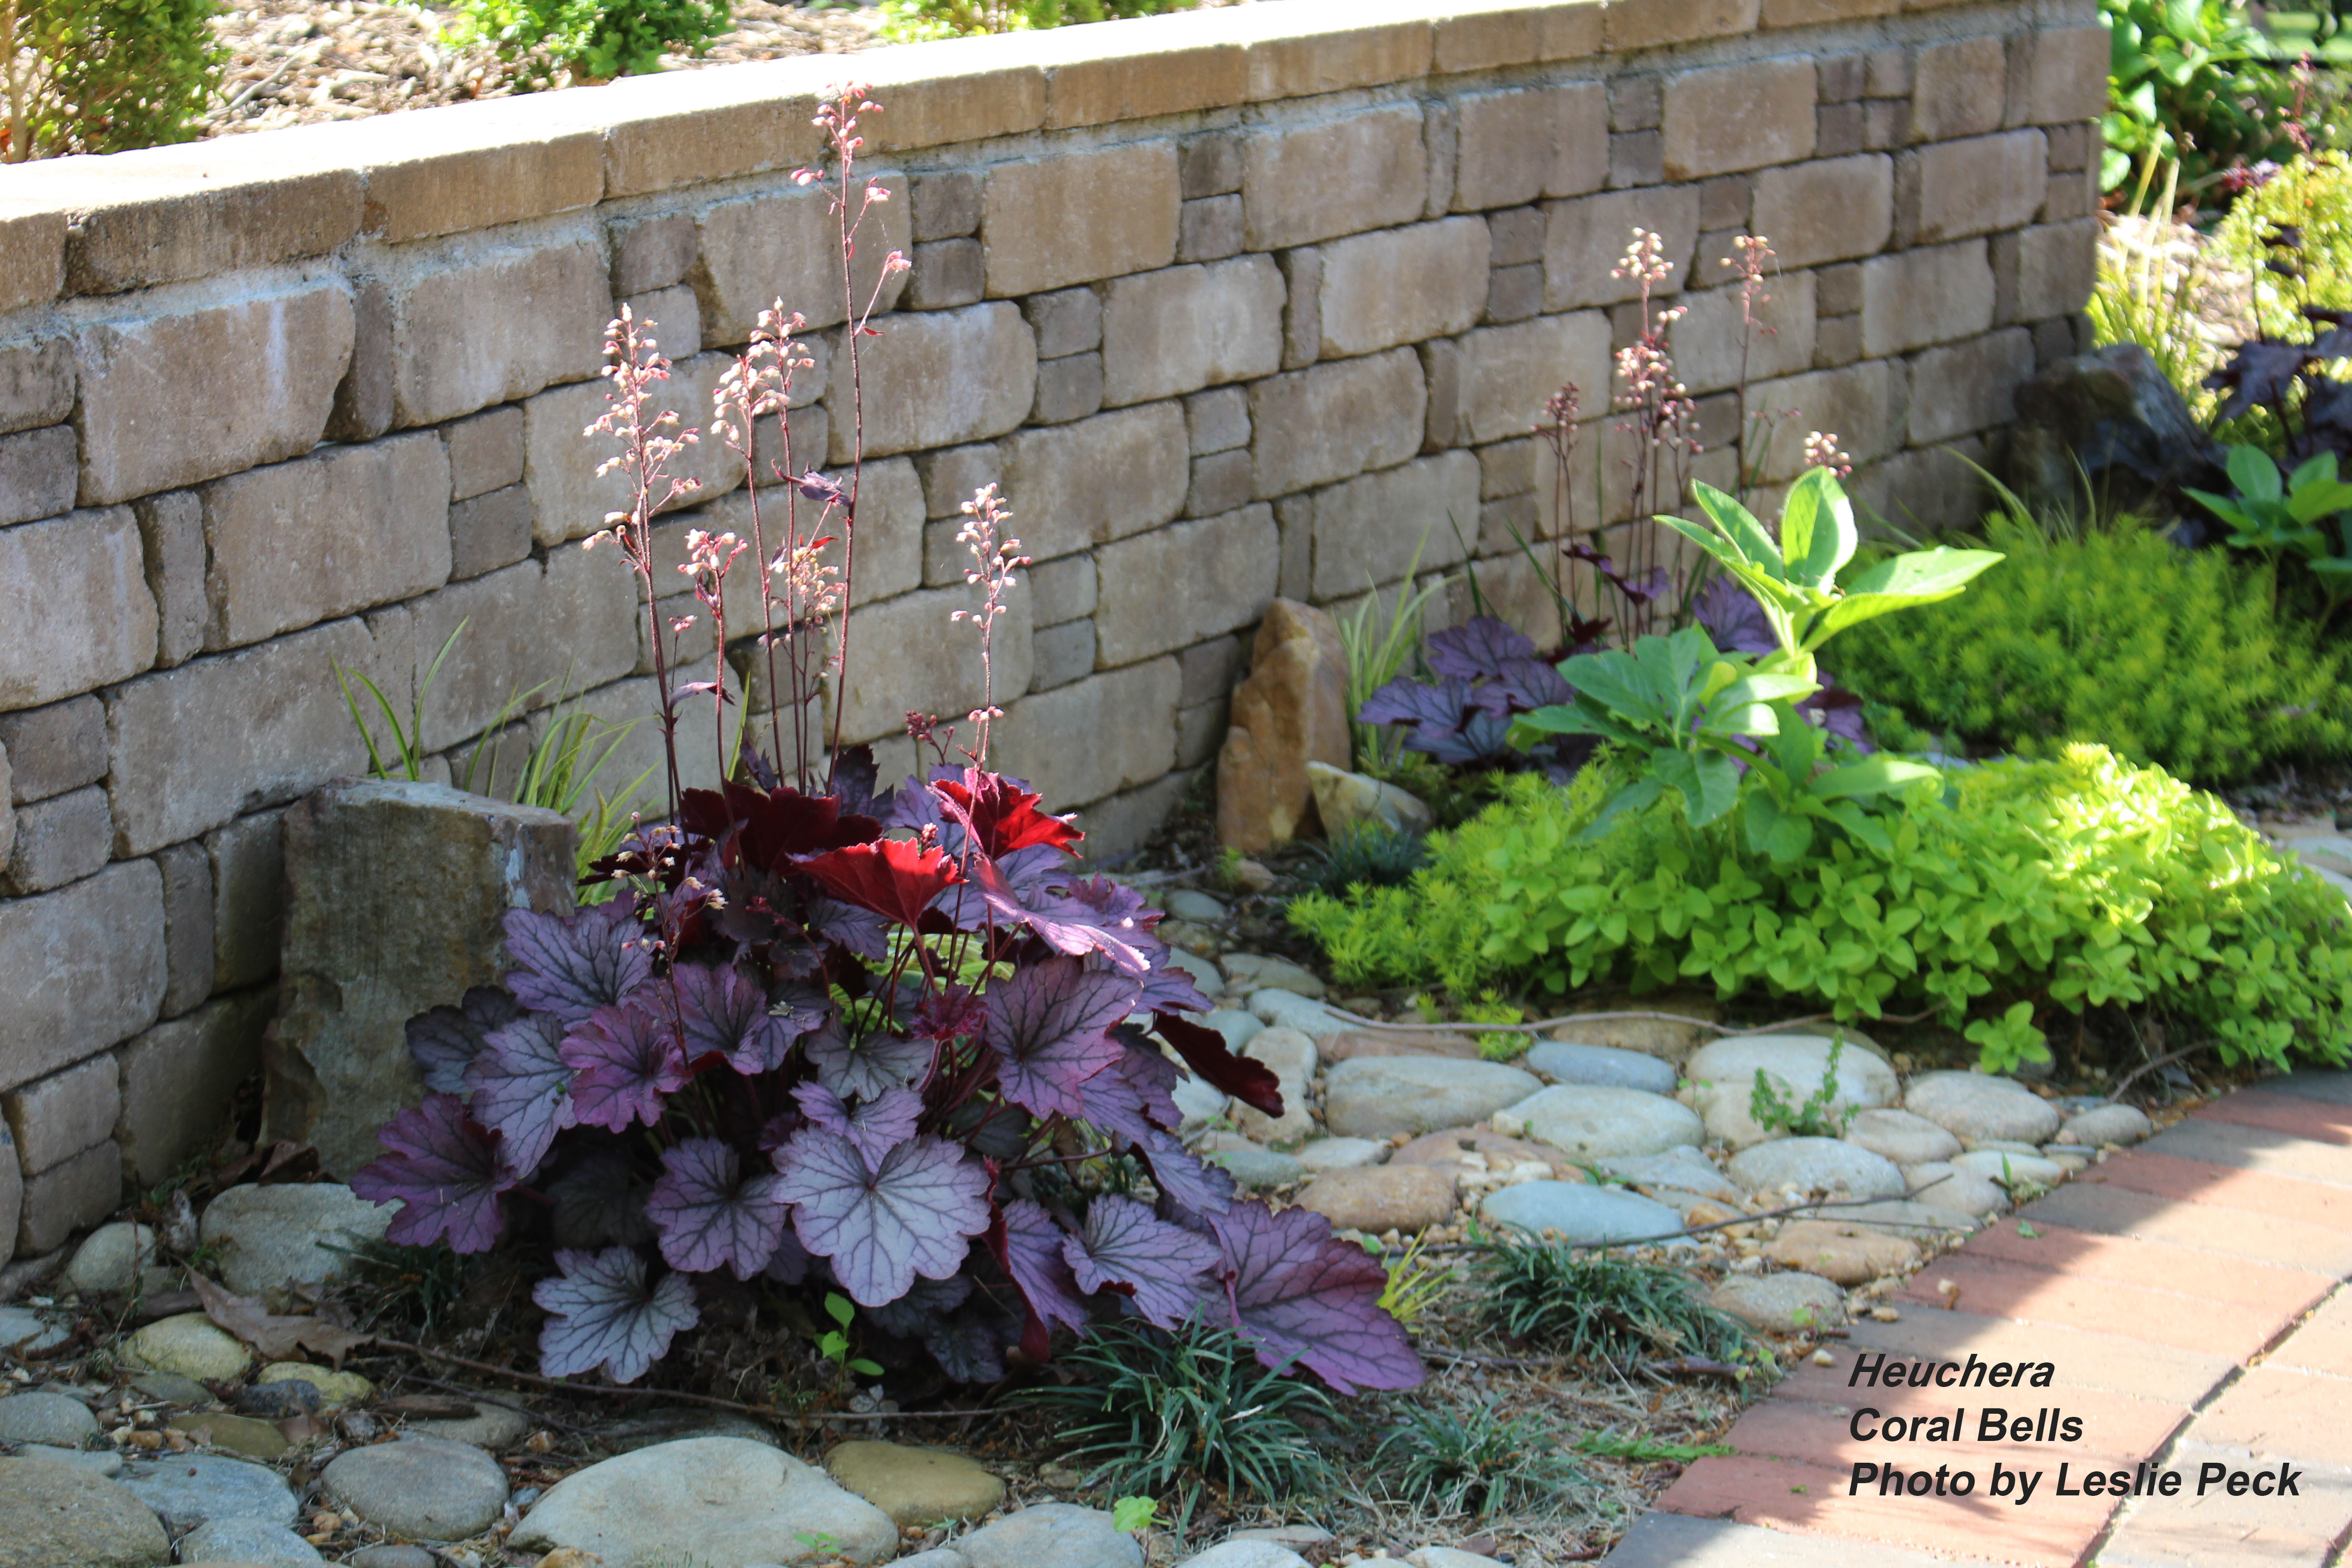 Plants and stone wall